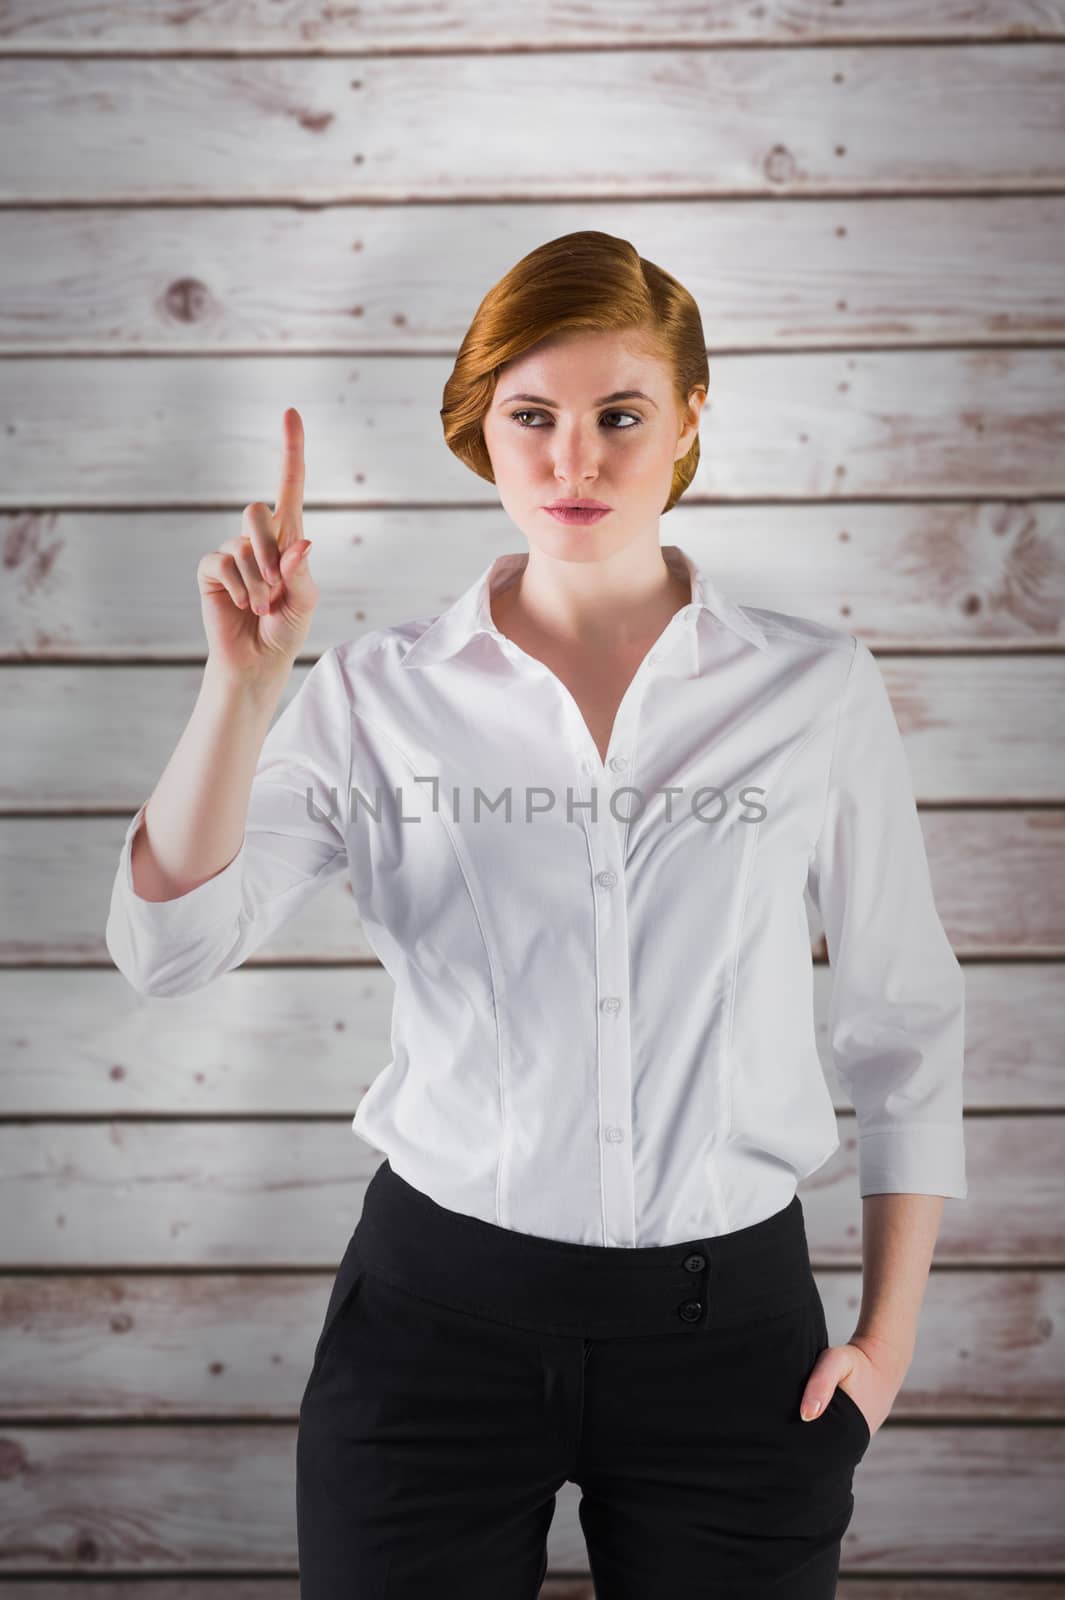 Composite image of businesswoman standing and pointing by Wavebreakmedia